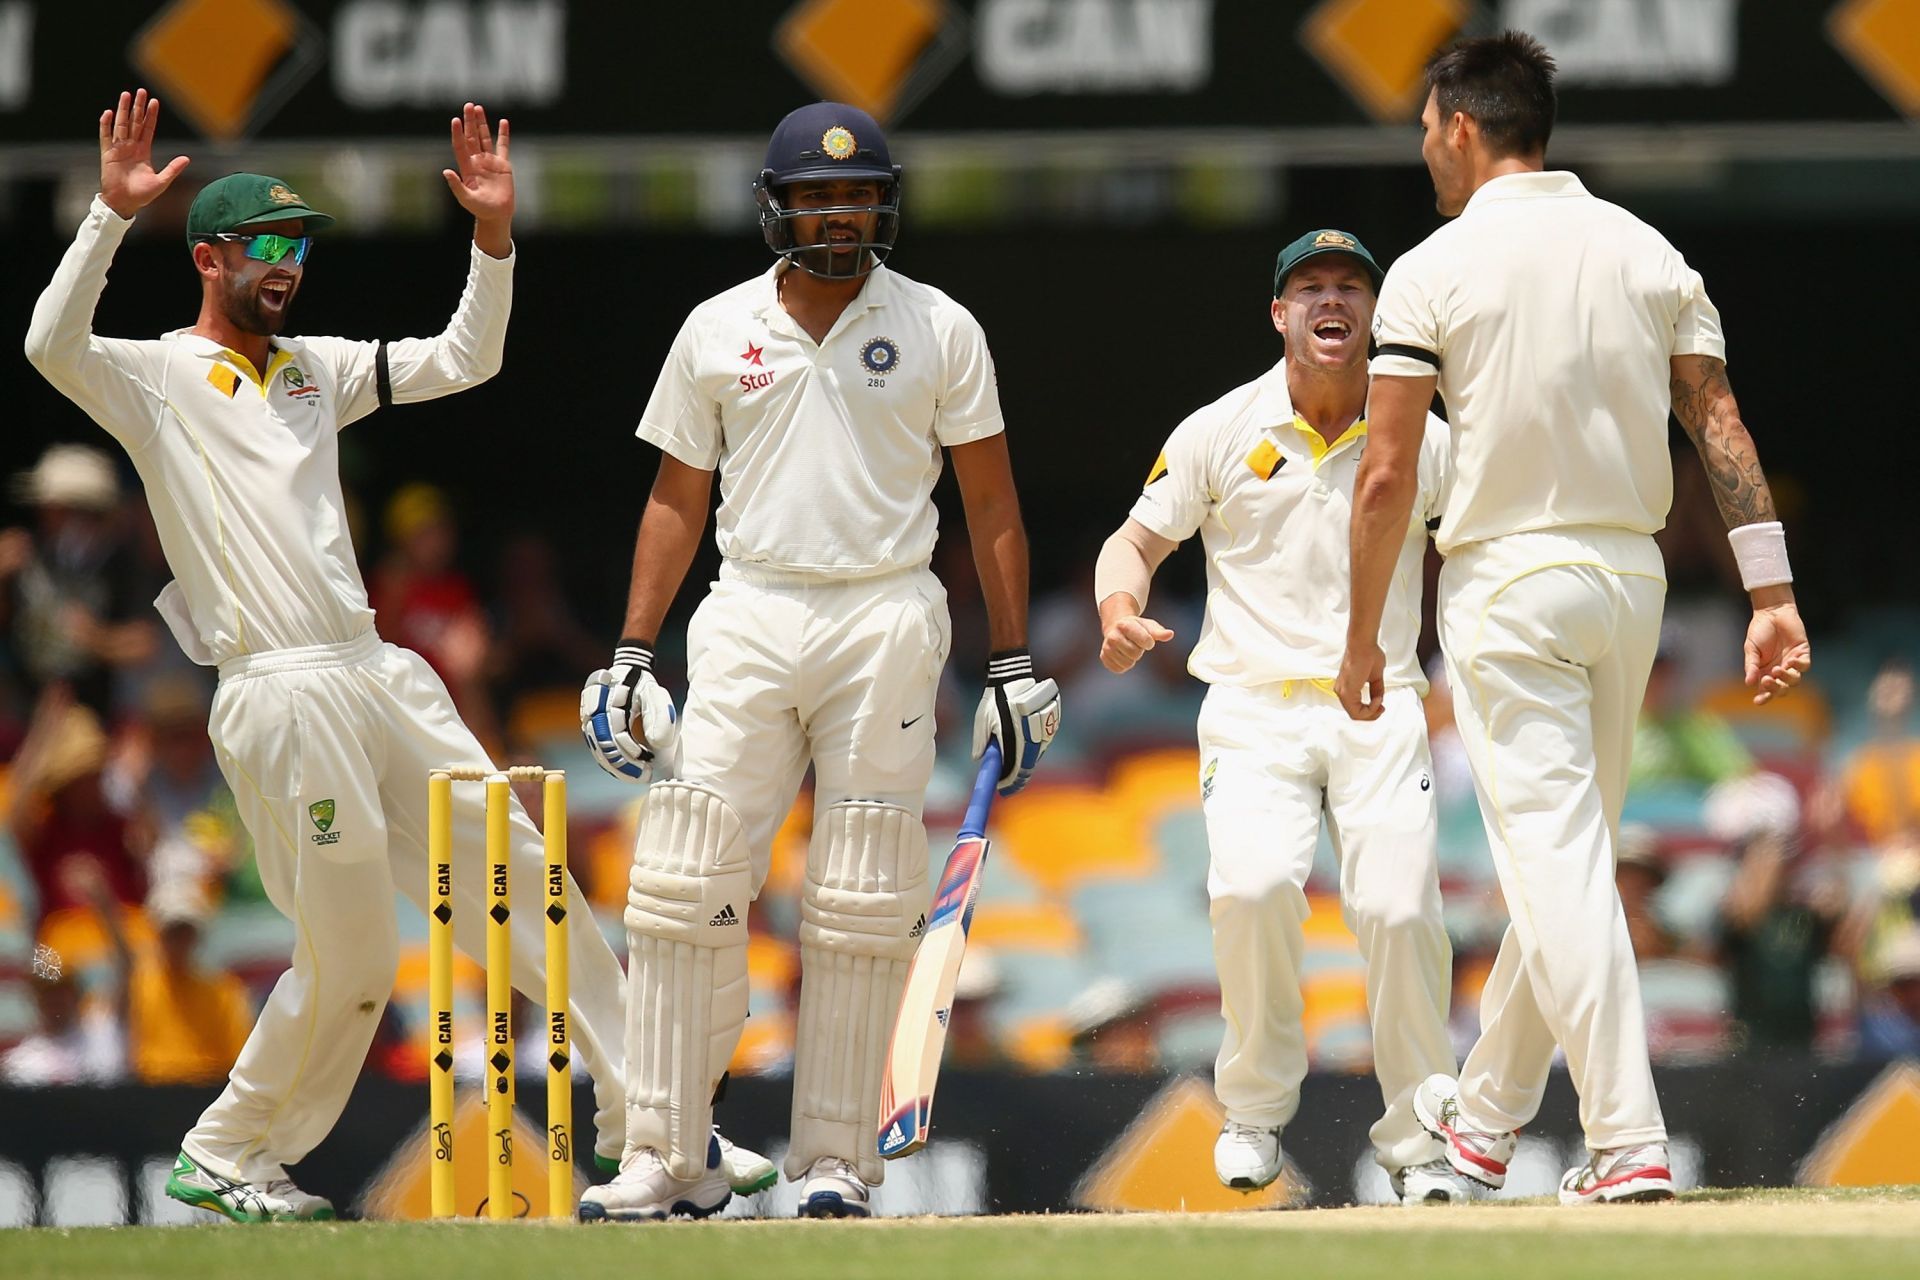 Rohit Sharma and Mitchell Johnson were involved in an exchange during the Gabba Test of 2014.